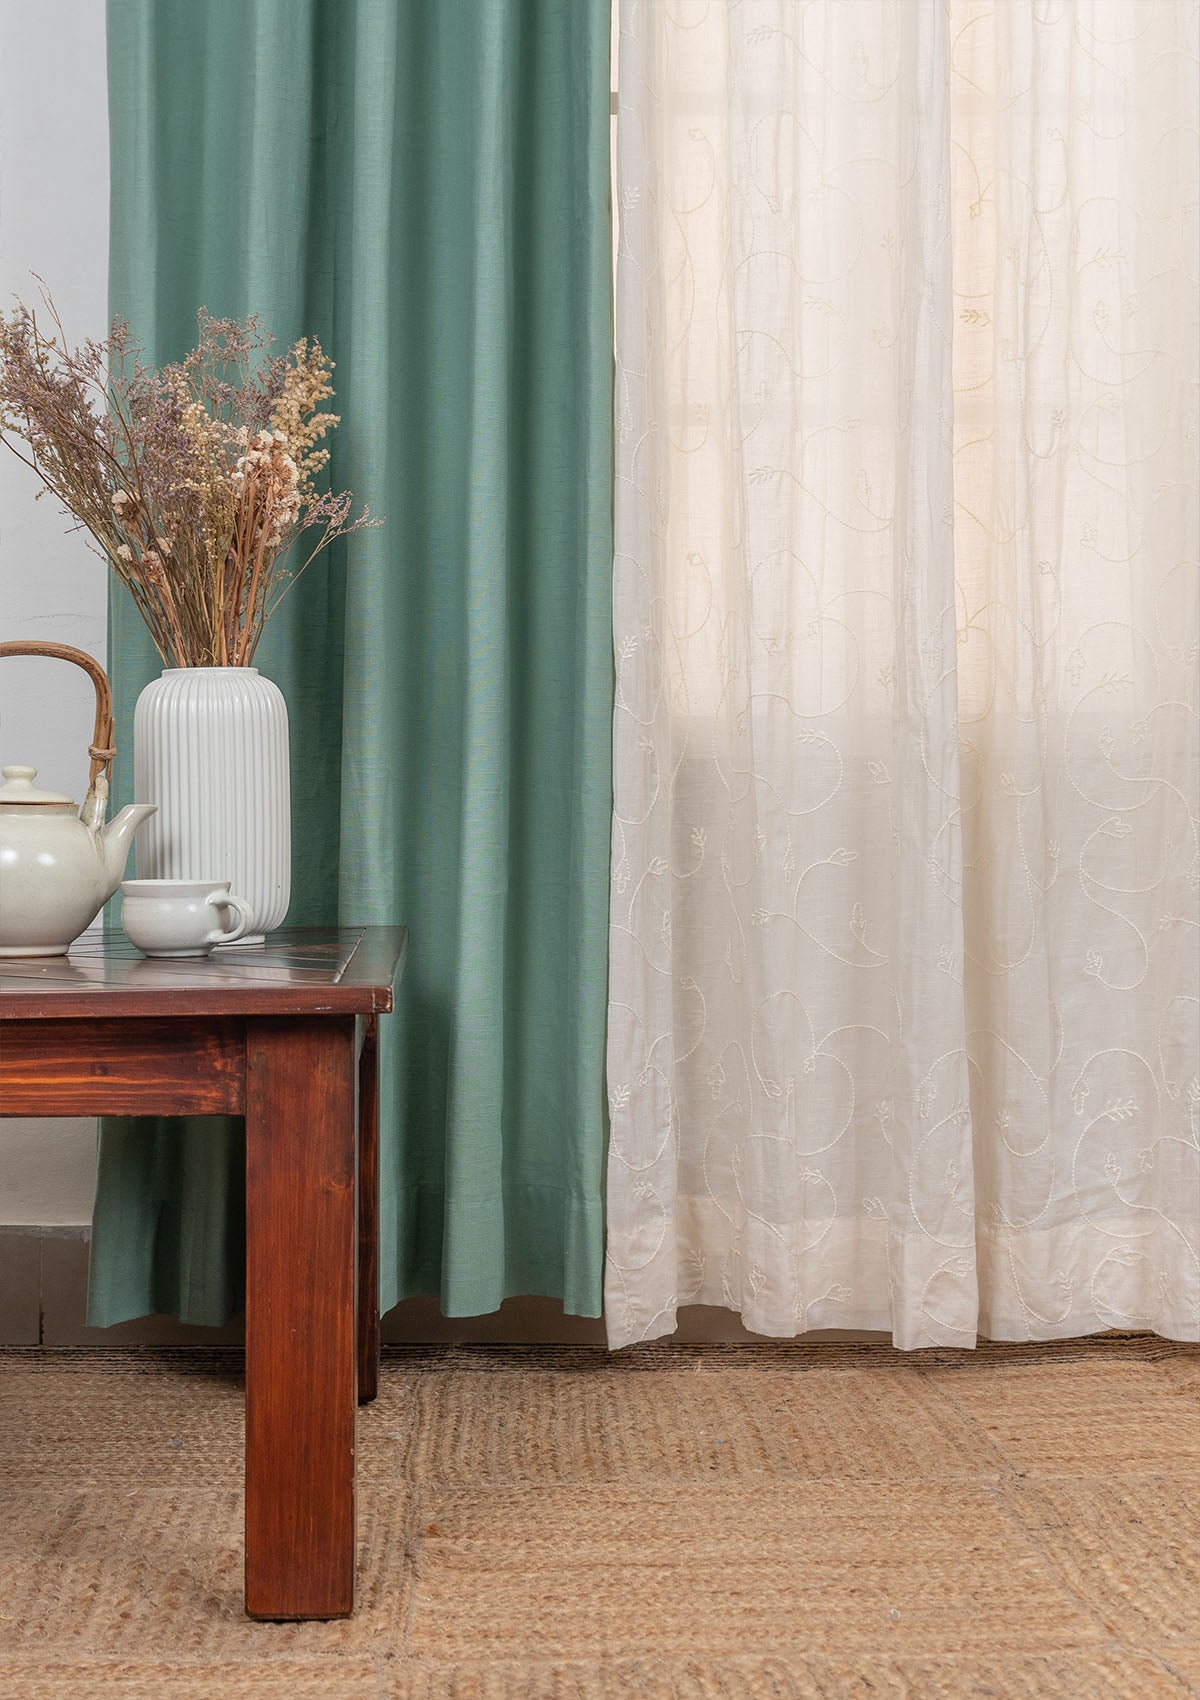 Solid Sage green cotton curtain with Ivy vines cream embroidered sheer 100% cotton curtains for living room - Set of 4